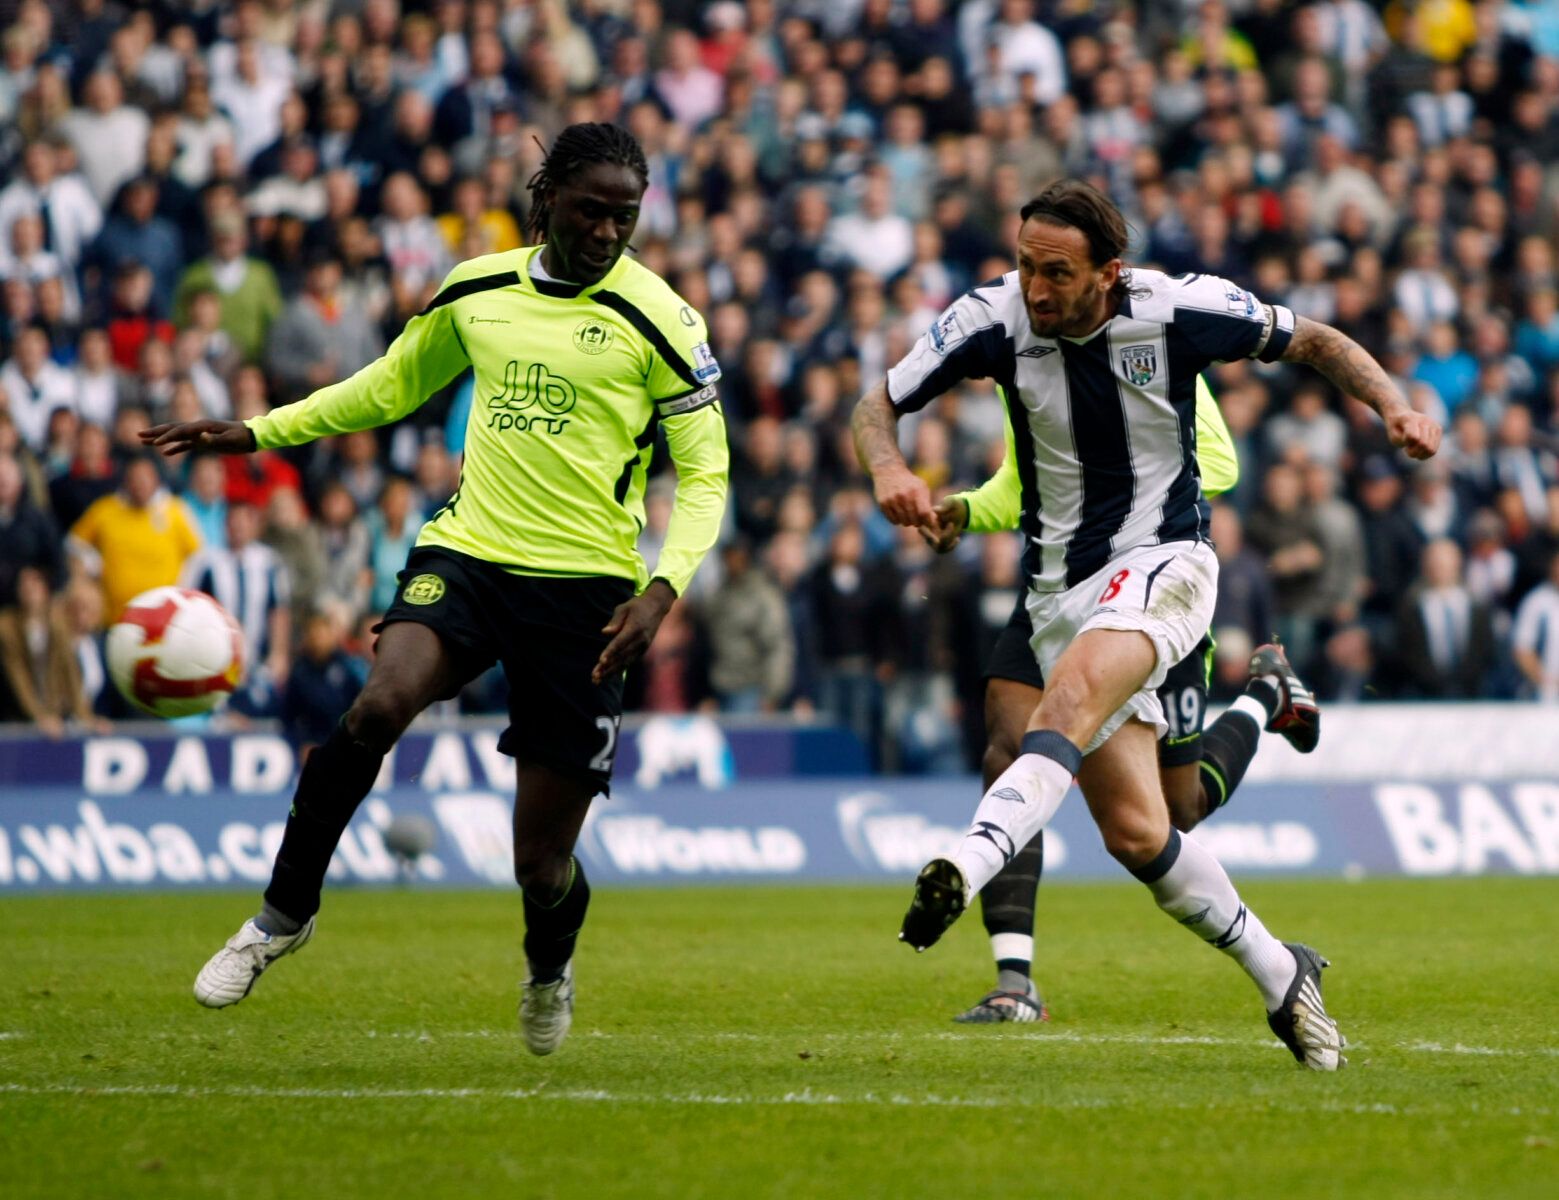 Football - West Bromwich Albion  v Wigan Athletic Barclays Premier League - The Hawthorns - 9/5/09 
Jonathan Greening of West Brom shoots on goal  
Mandatory Credit: Action Images / Peter Ford 
Livepic 
NO ONLINE/INTERNET USE WITHOUT A LICENCE FROM THE FOOTBALL DATA CO LTD. FOR LICENCE ENQUIRIES PLEASE TELEPHONE +44 (0) 207 864 9000.